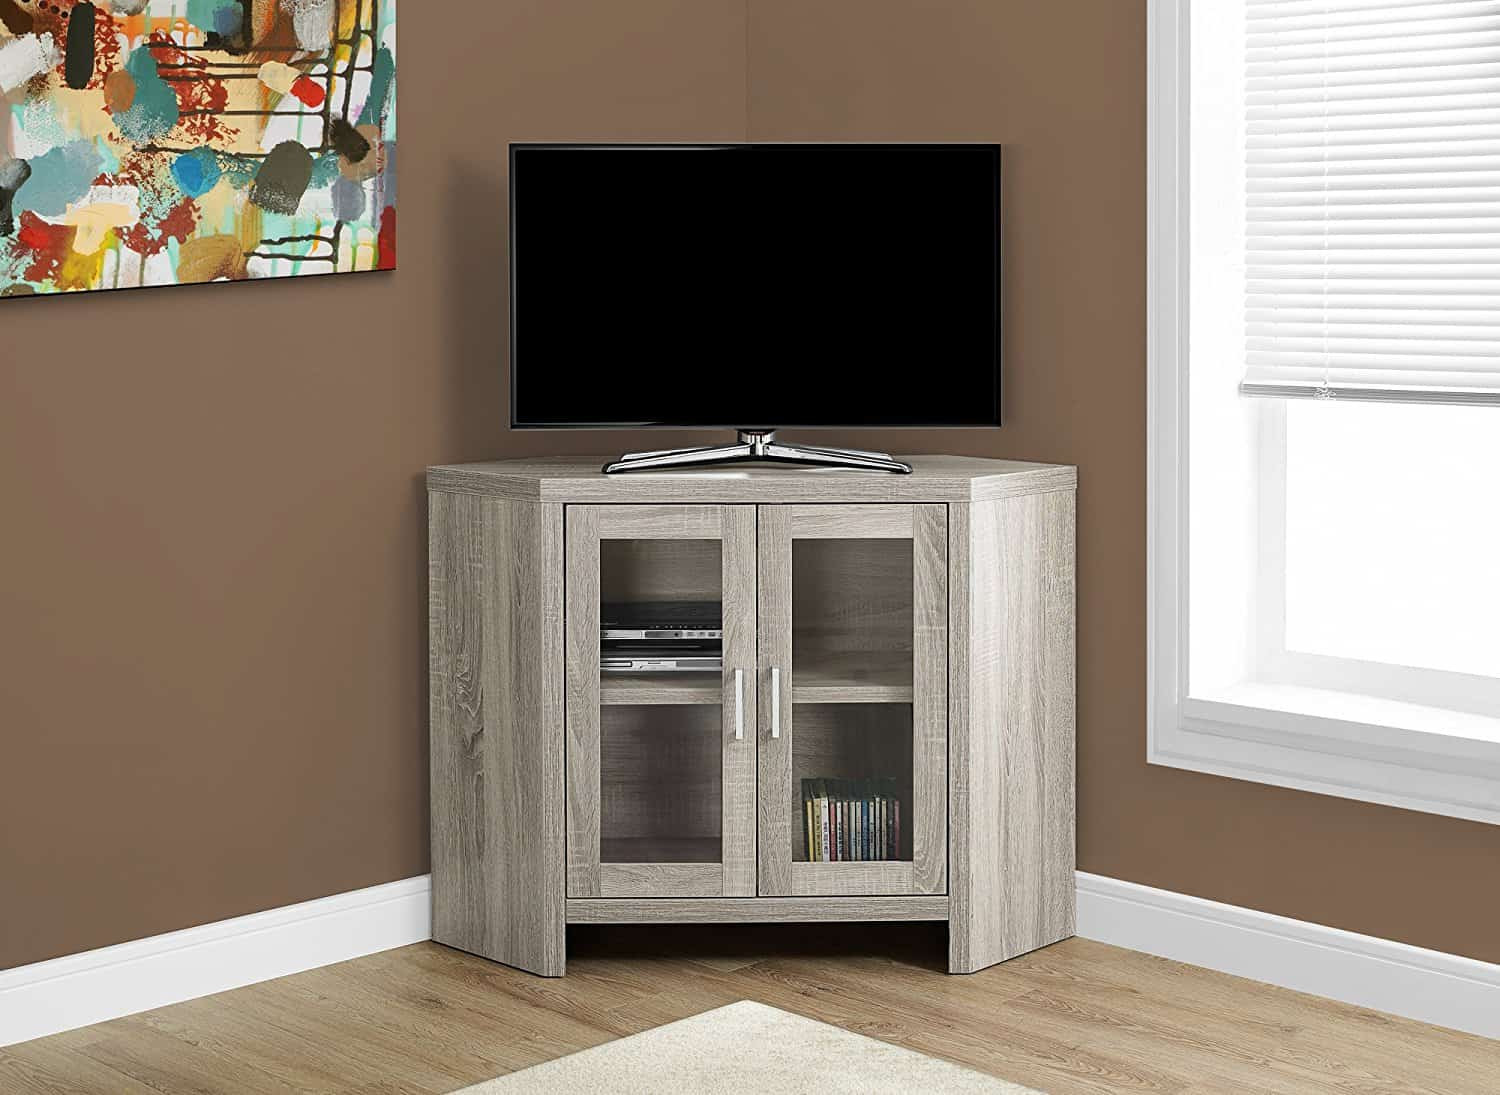 Small Tv For Kitchen Amazon
 13 Perfectly Small Corner Cabinet Ideas for 2020 Kitchen